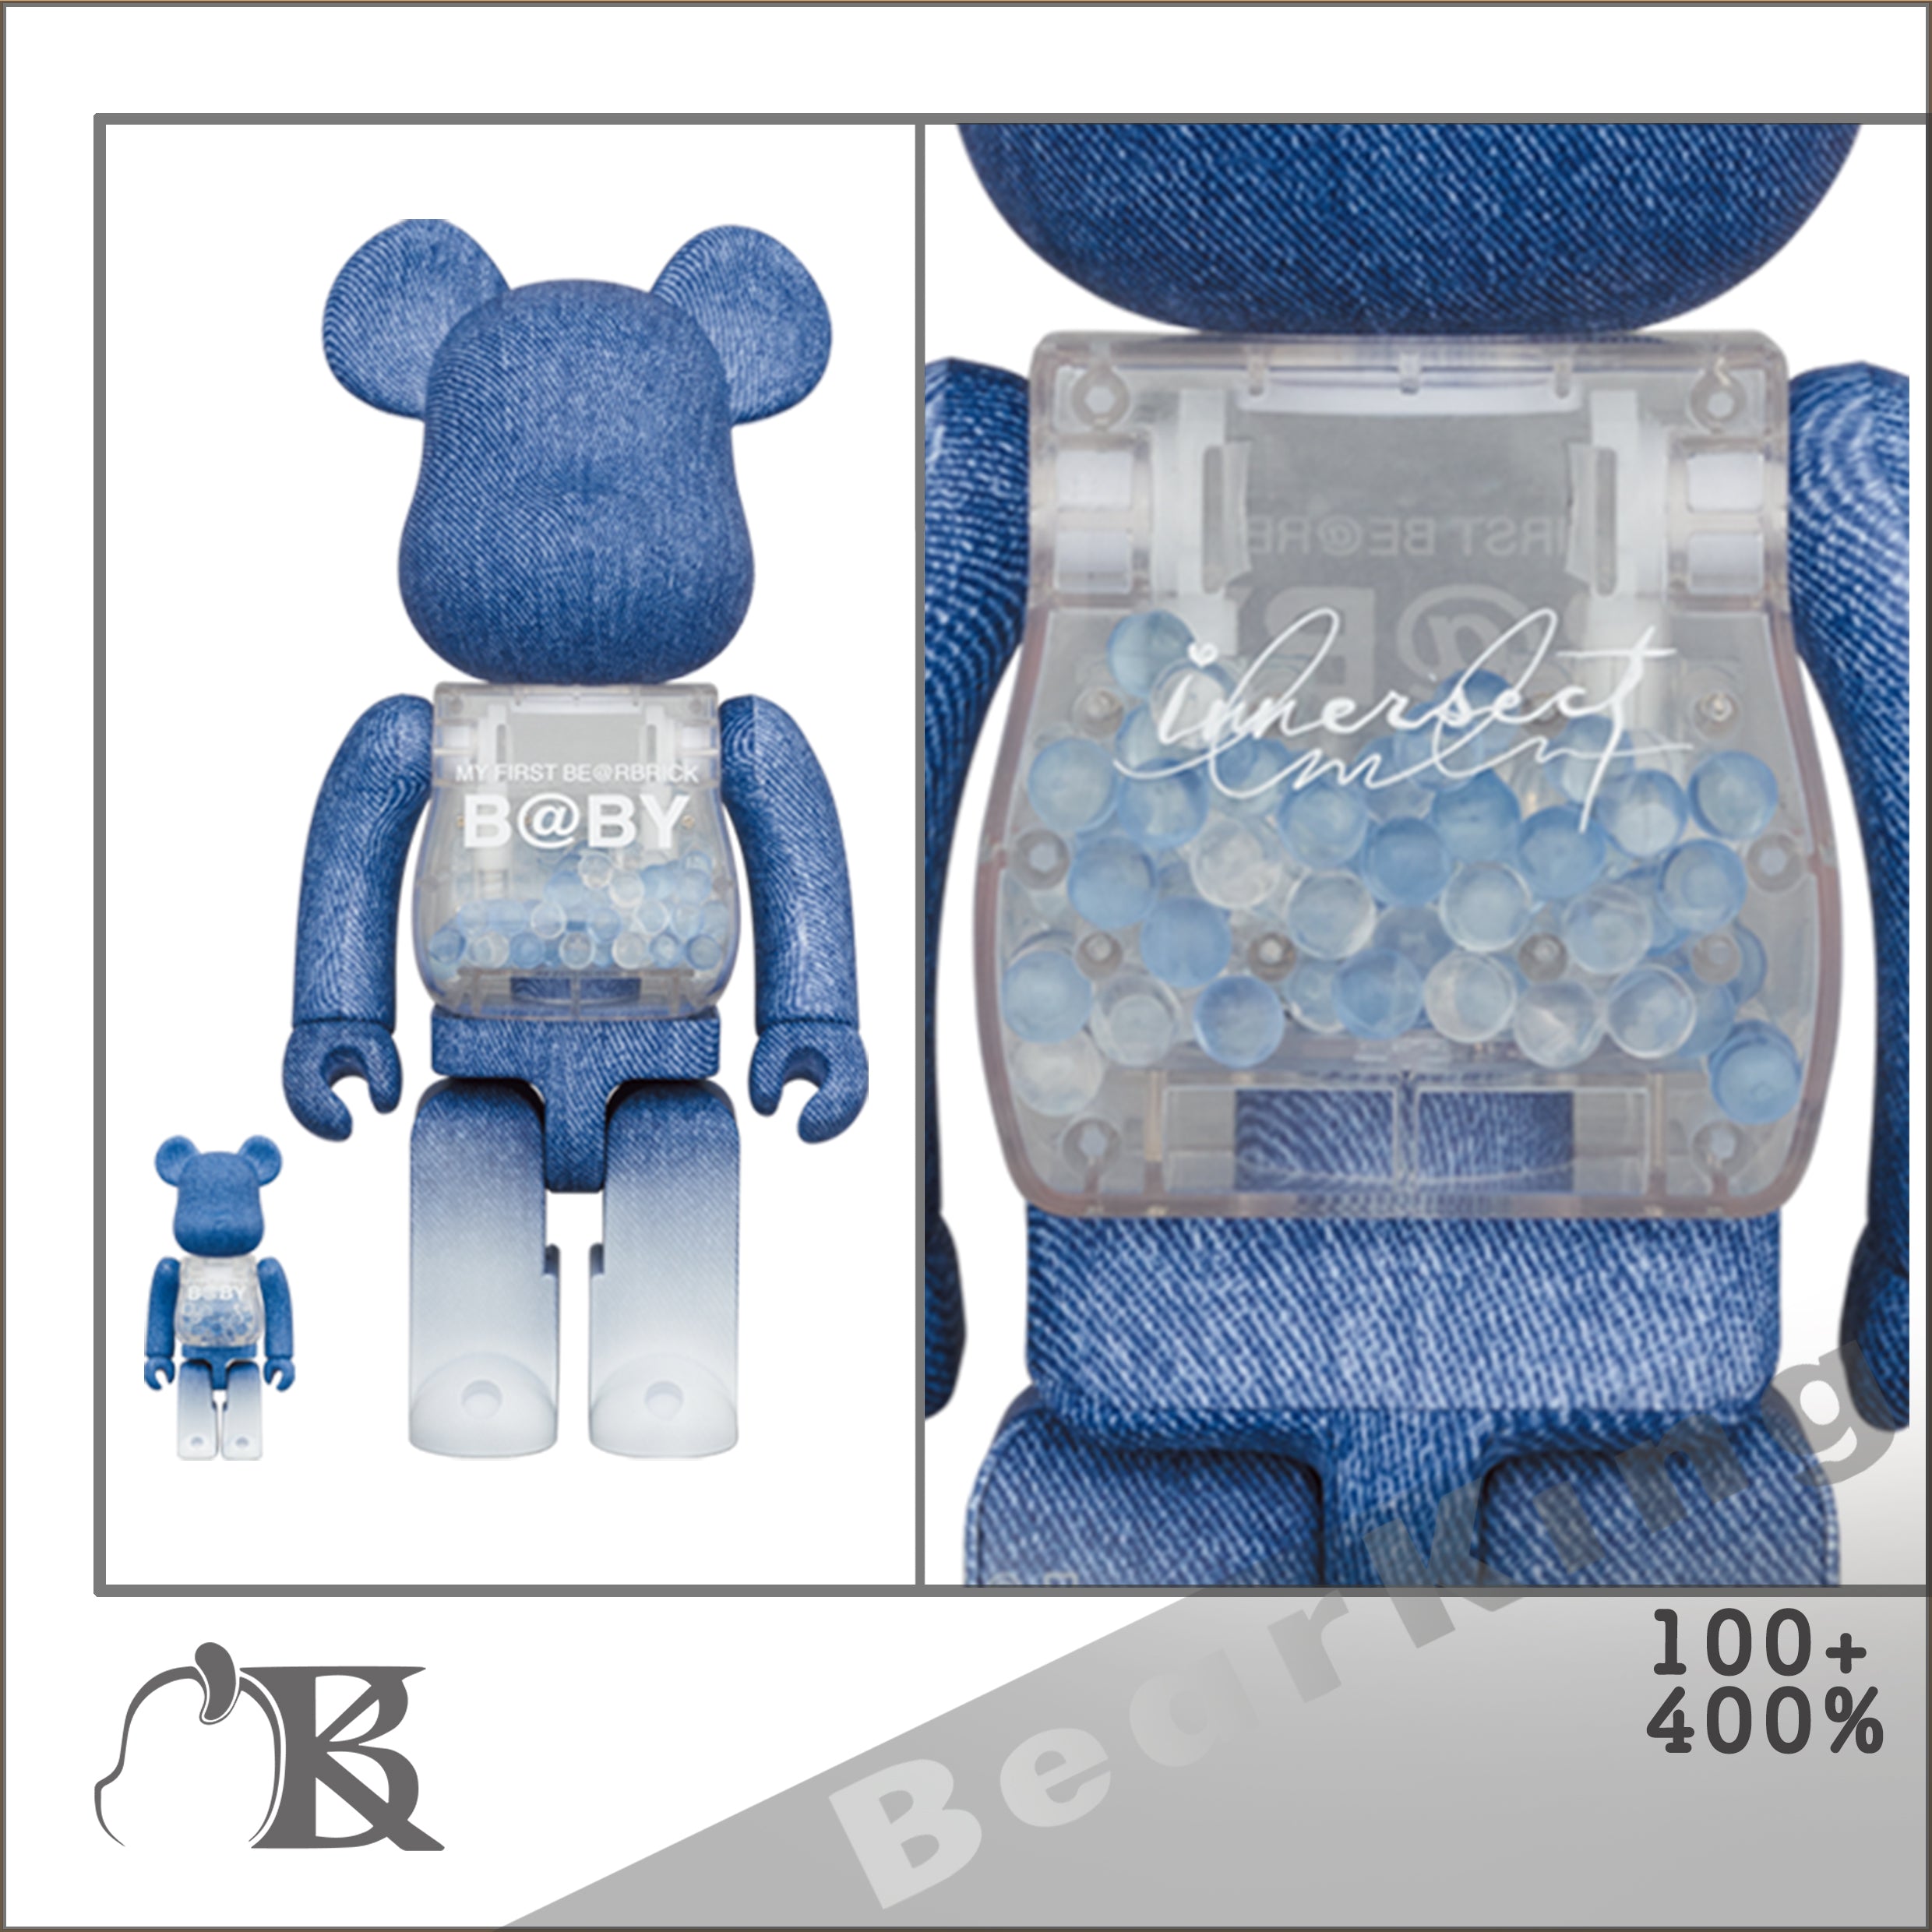 MY FIRST BE@RBRICK INNERSECT 2021ソラマチ